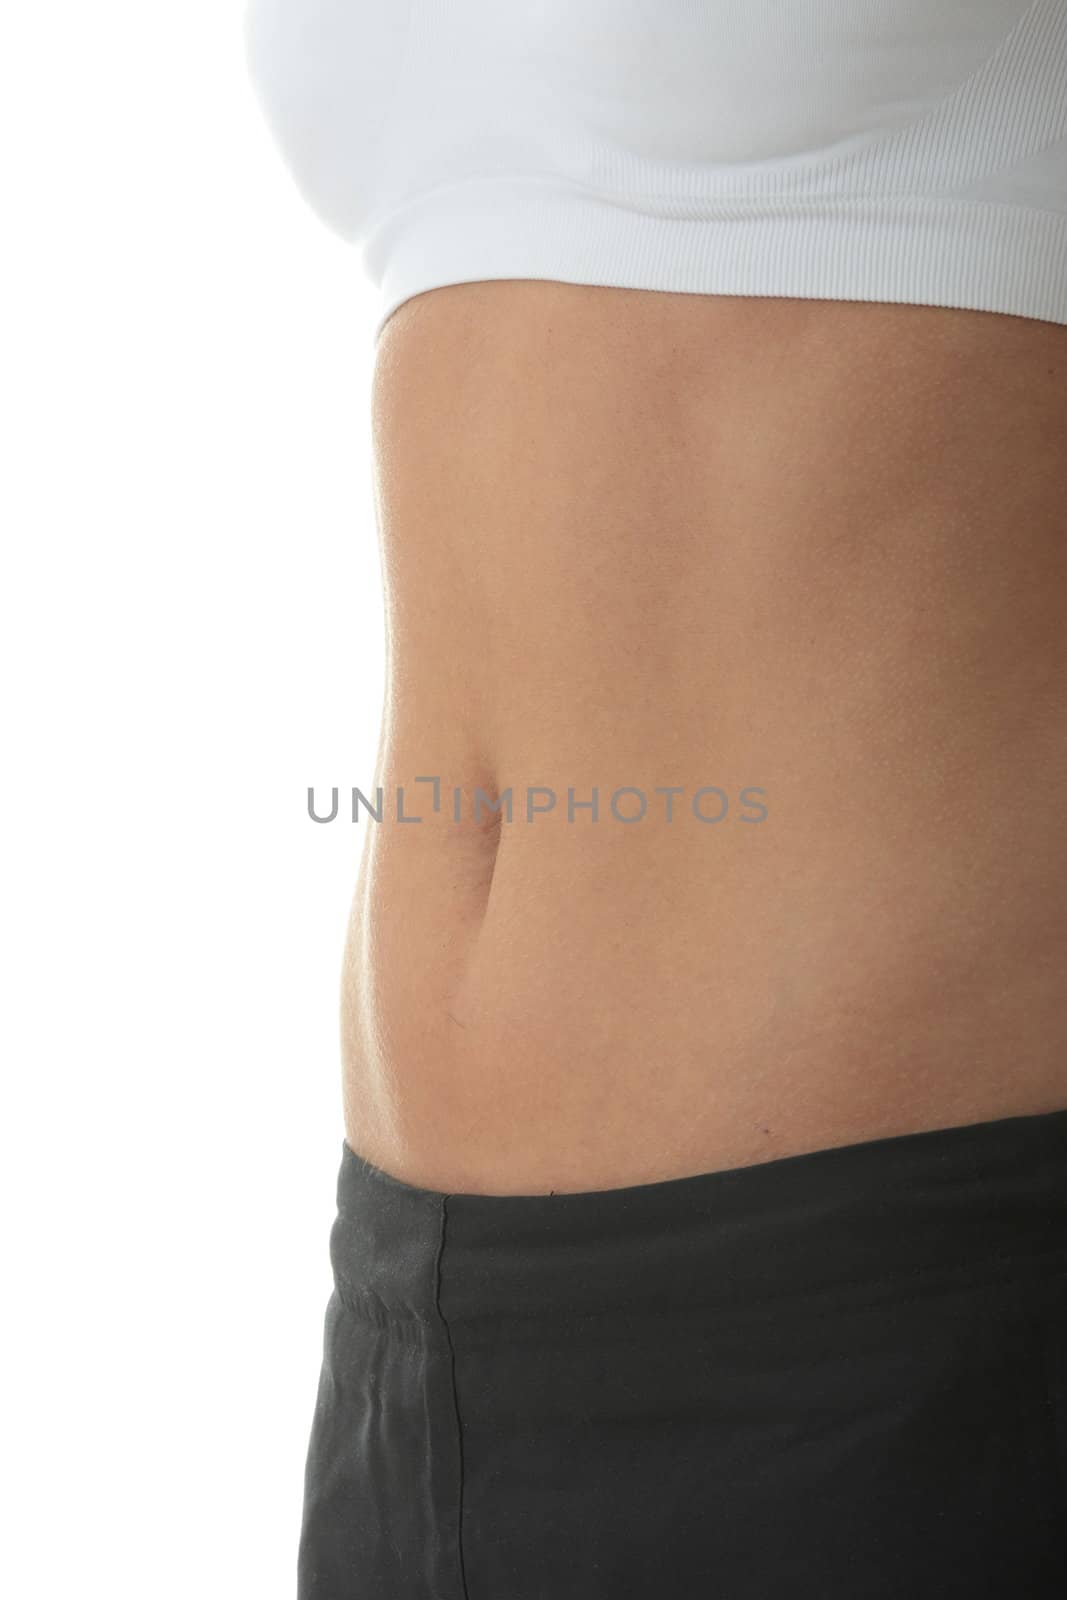 Midsection of a physically fit young woman over white background